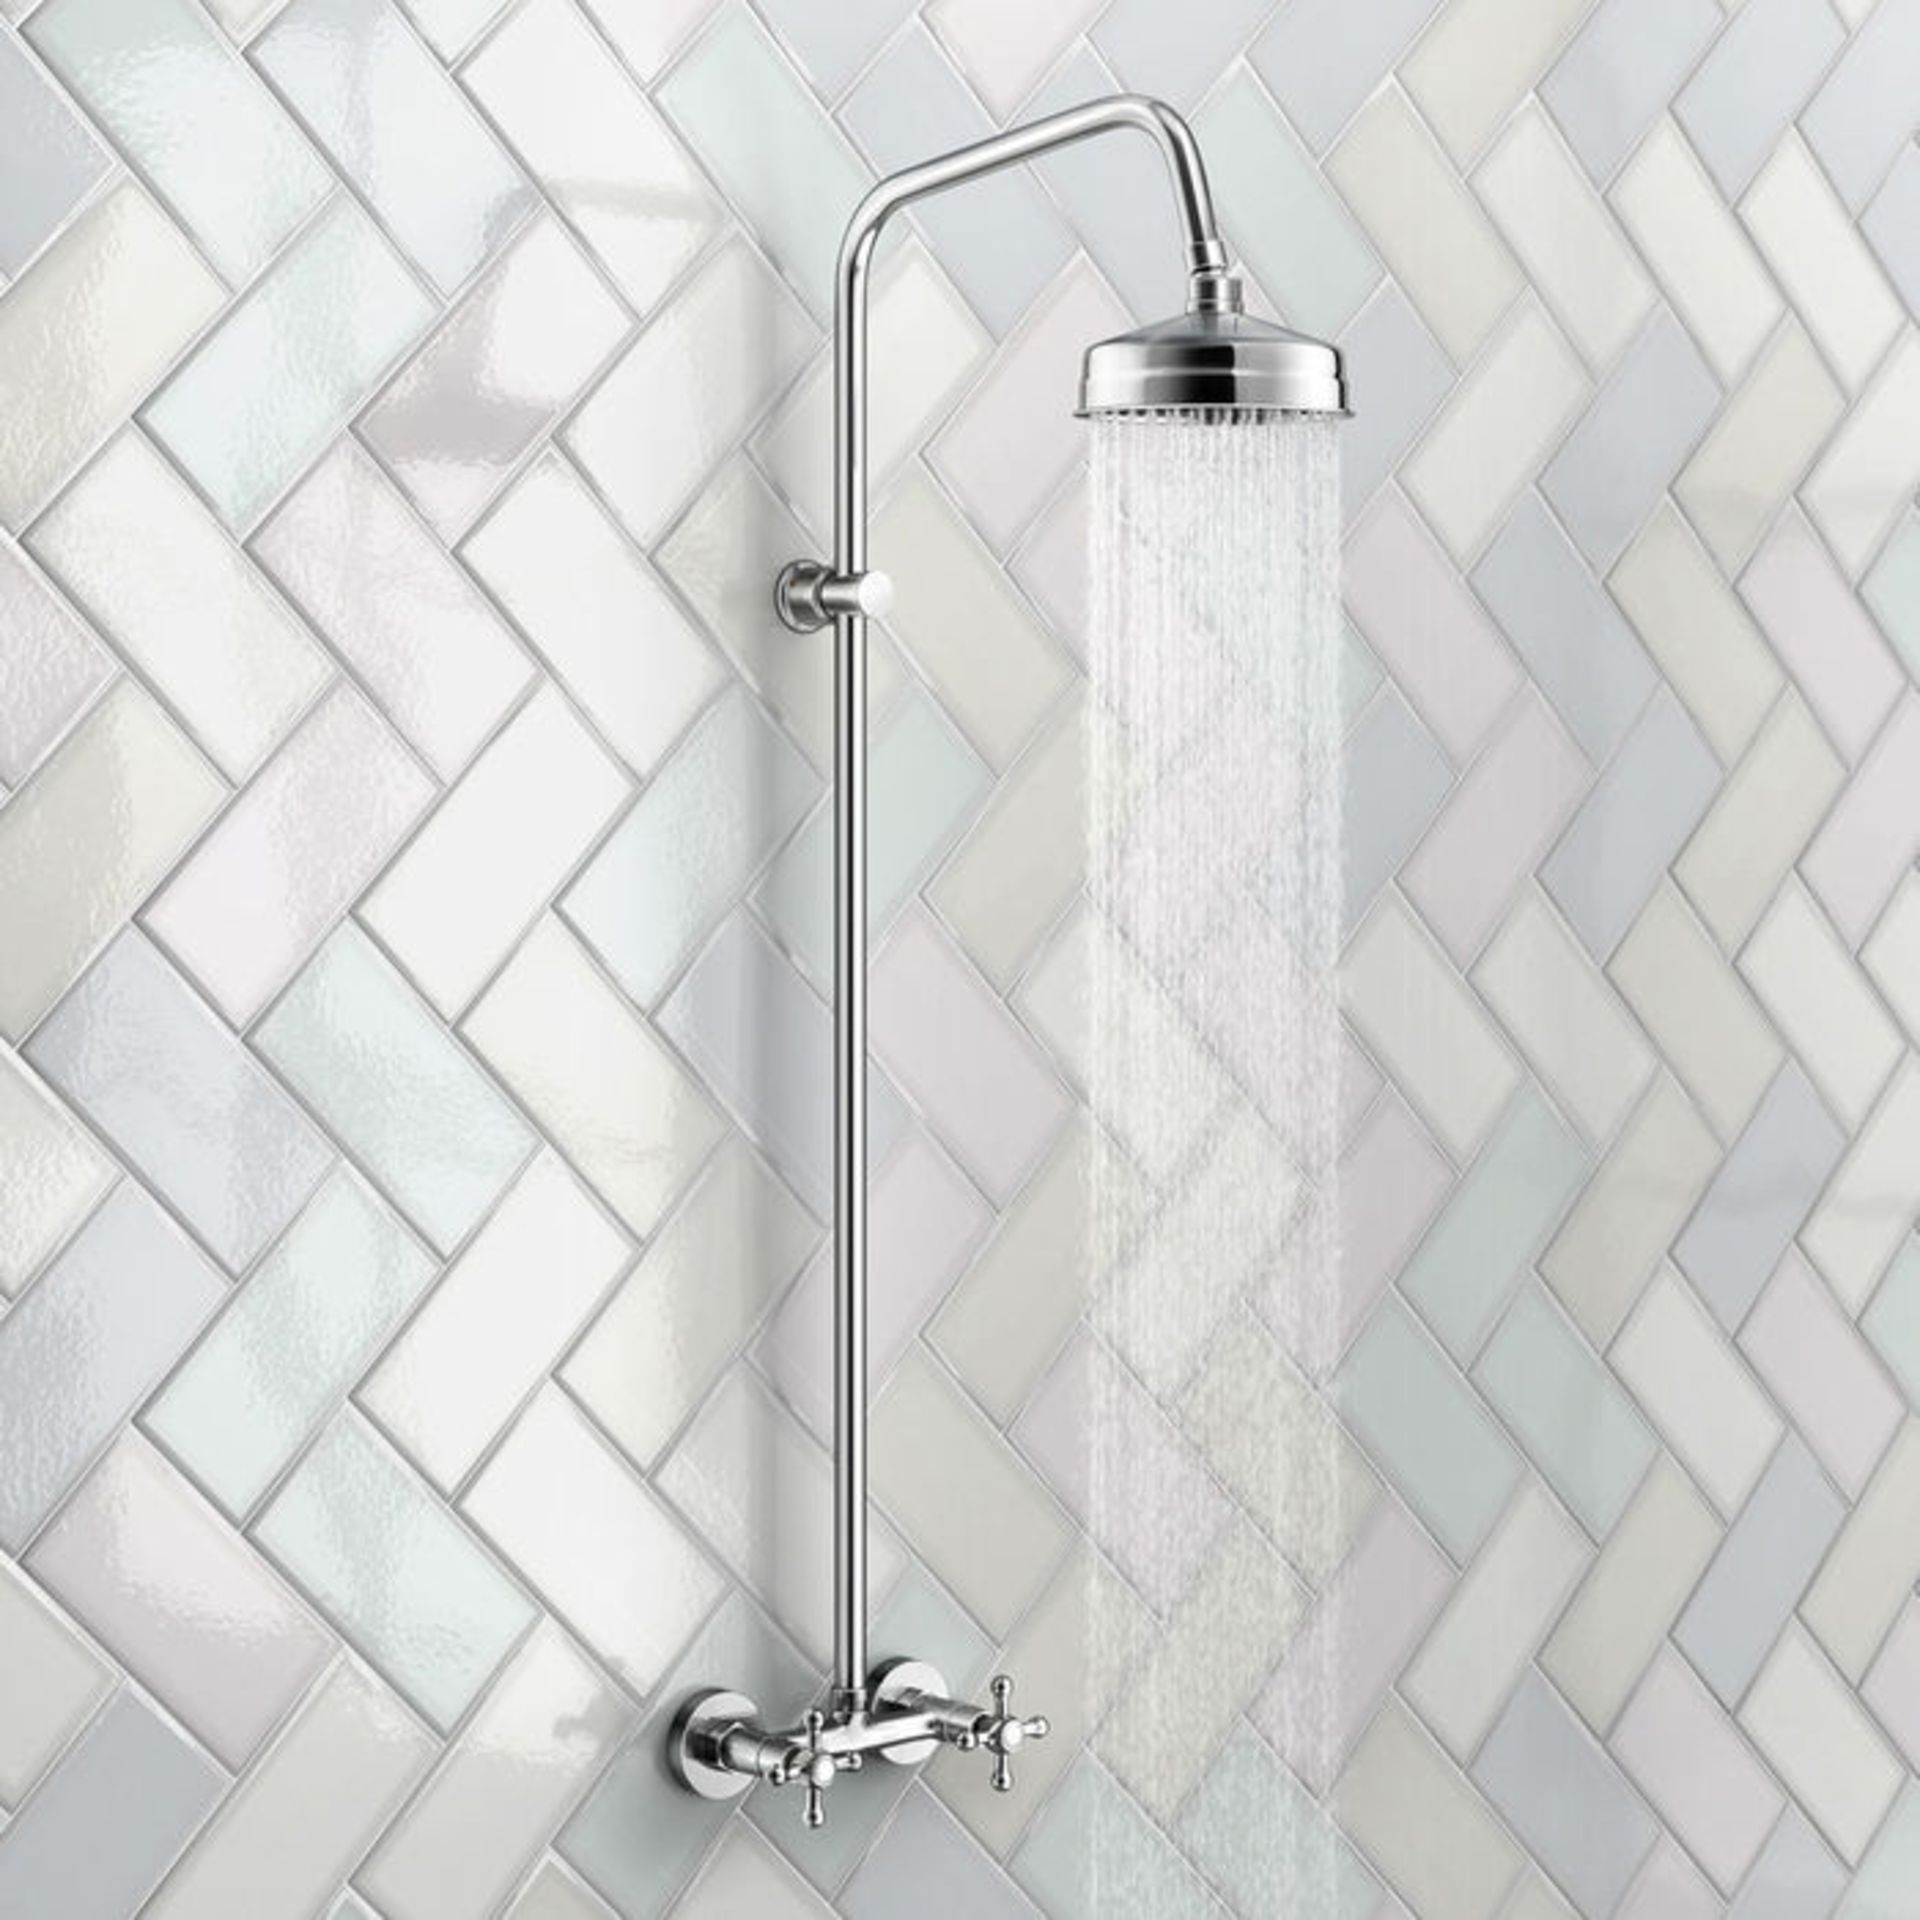 (CT193) Traditional Exposed Shower & Medium Head Exposed design makes for a statement piece Stunning